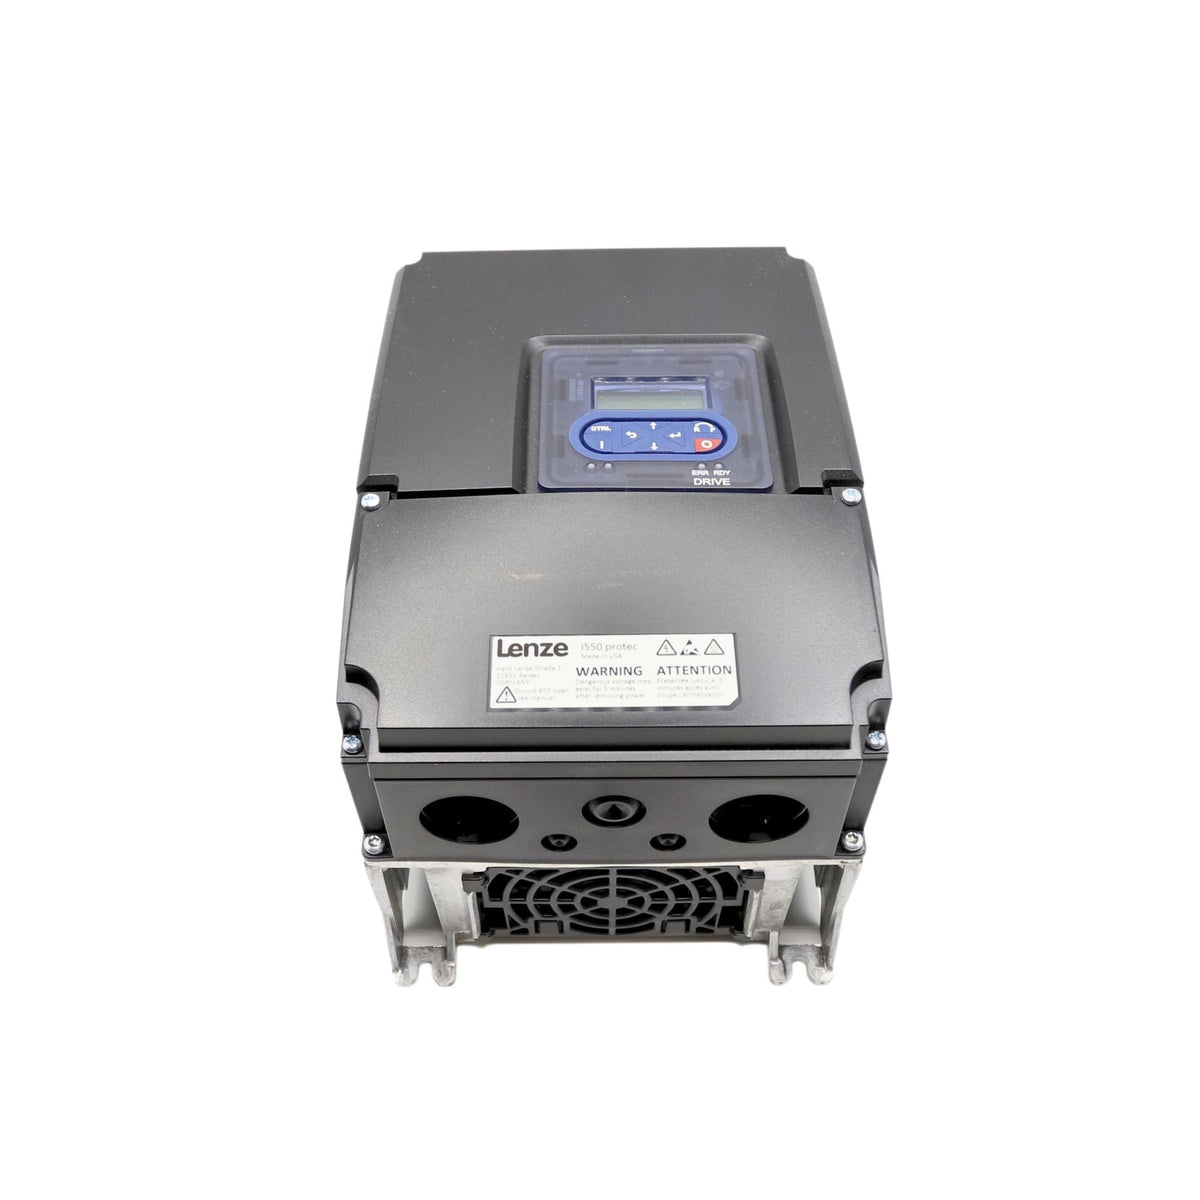 Lenze | I550 Protec 7.5hp Wall Mount, Nema 4x rated, Keypad, Incremental encoder (HTL) via two digital inputs, 5digital inputs, 2 analog inputs, 1 digital output 1 analog Output, 1 relay | I55AP255F00711K00S - front view